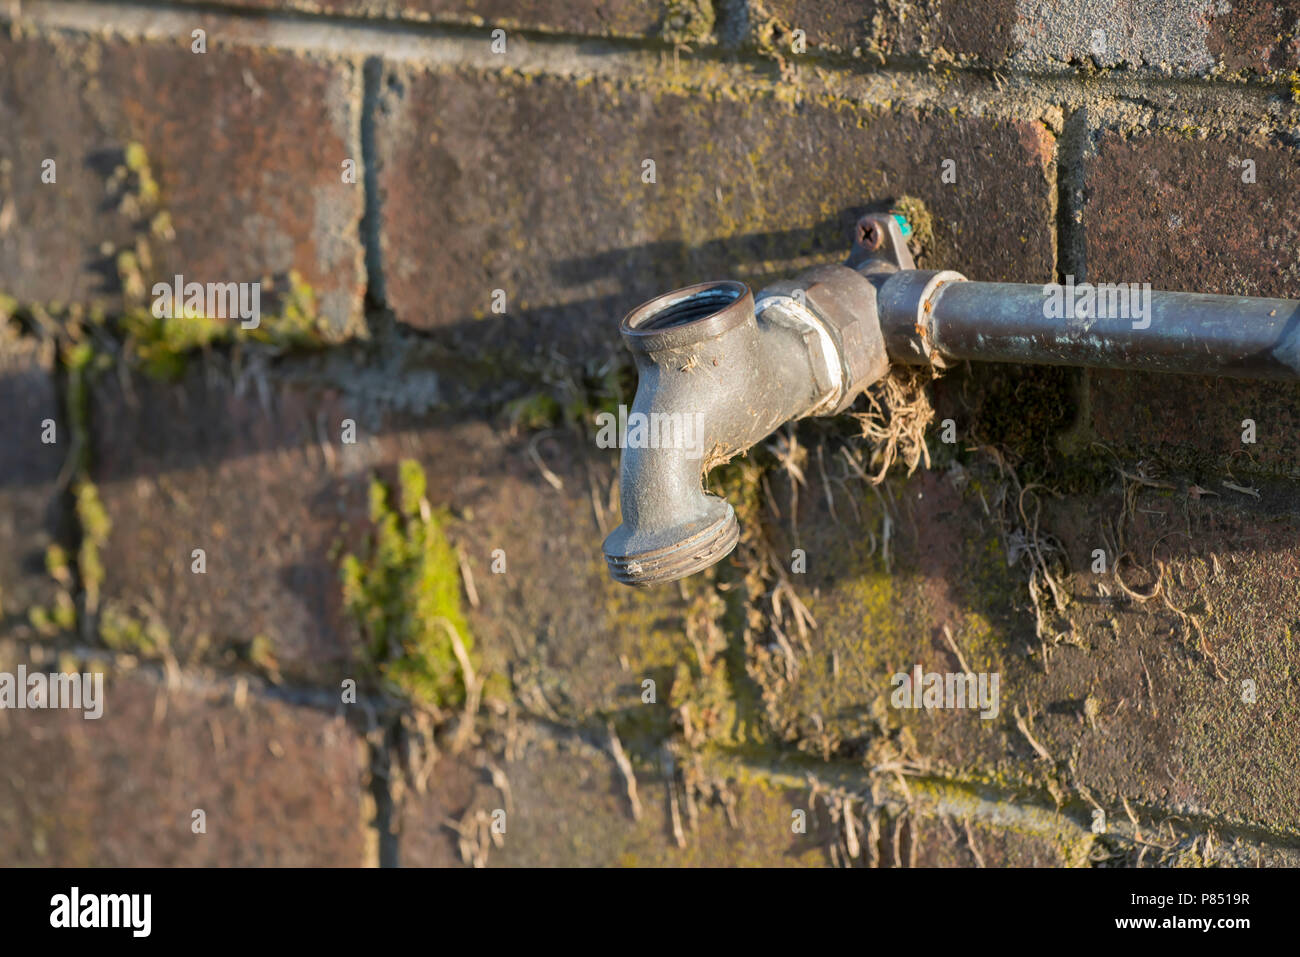 An outdoor tap or faucet with the turn handle valve removed so it cant be used. the tap is plumbed to a mossy brick wall. Stock Photo